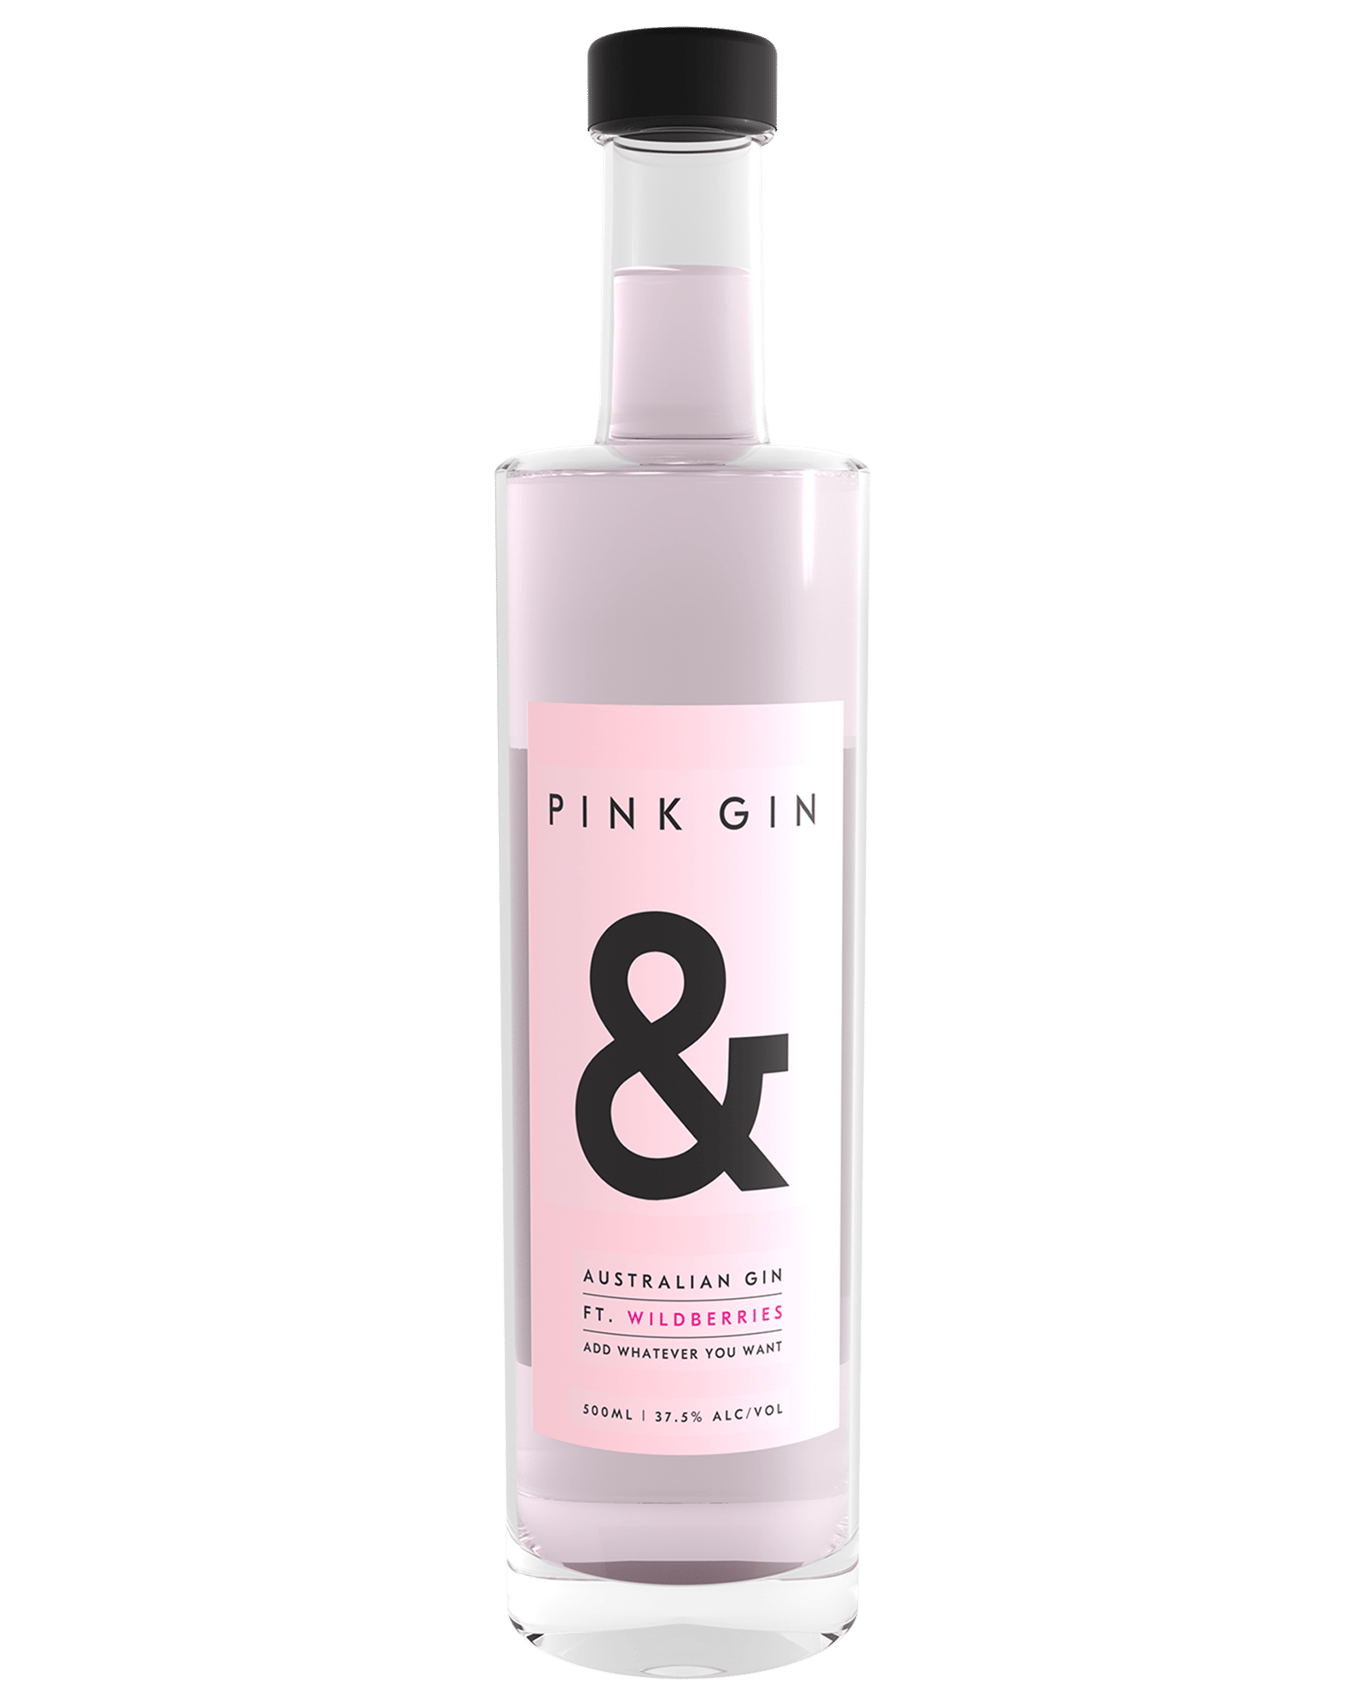 Pink Gin And 500ml Unbeatable Prices Buy Online Best Deals With Delivery Dan Murphys